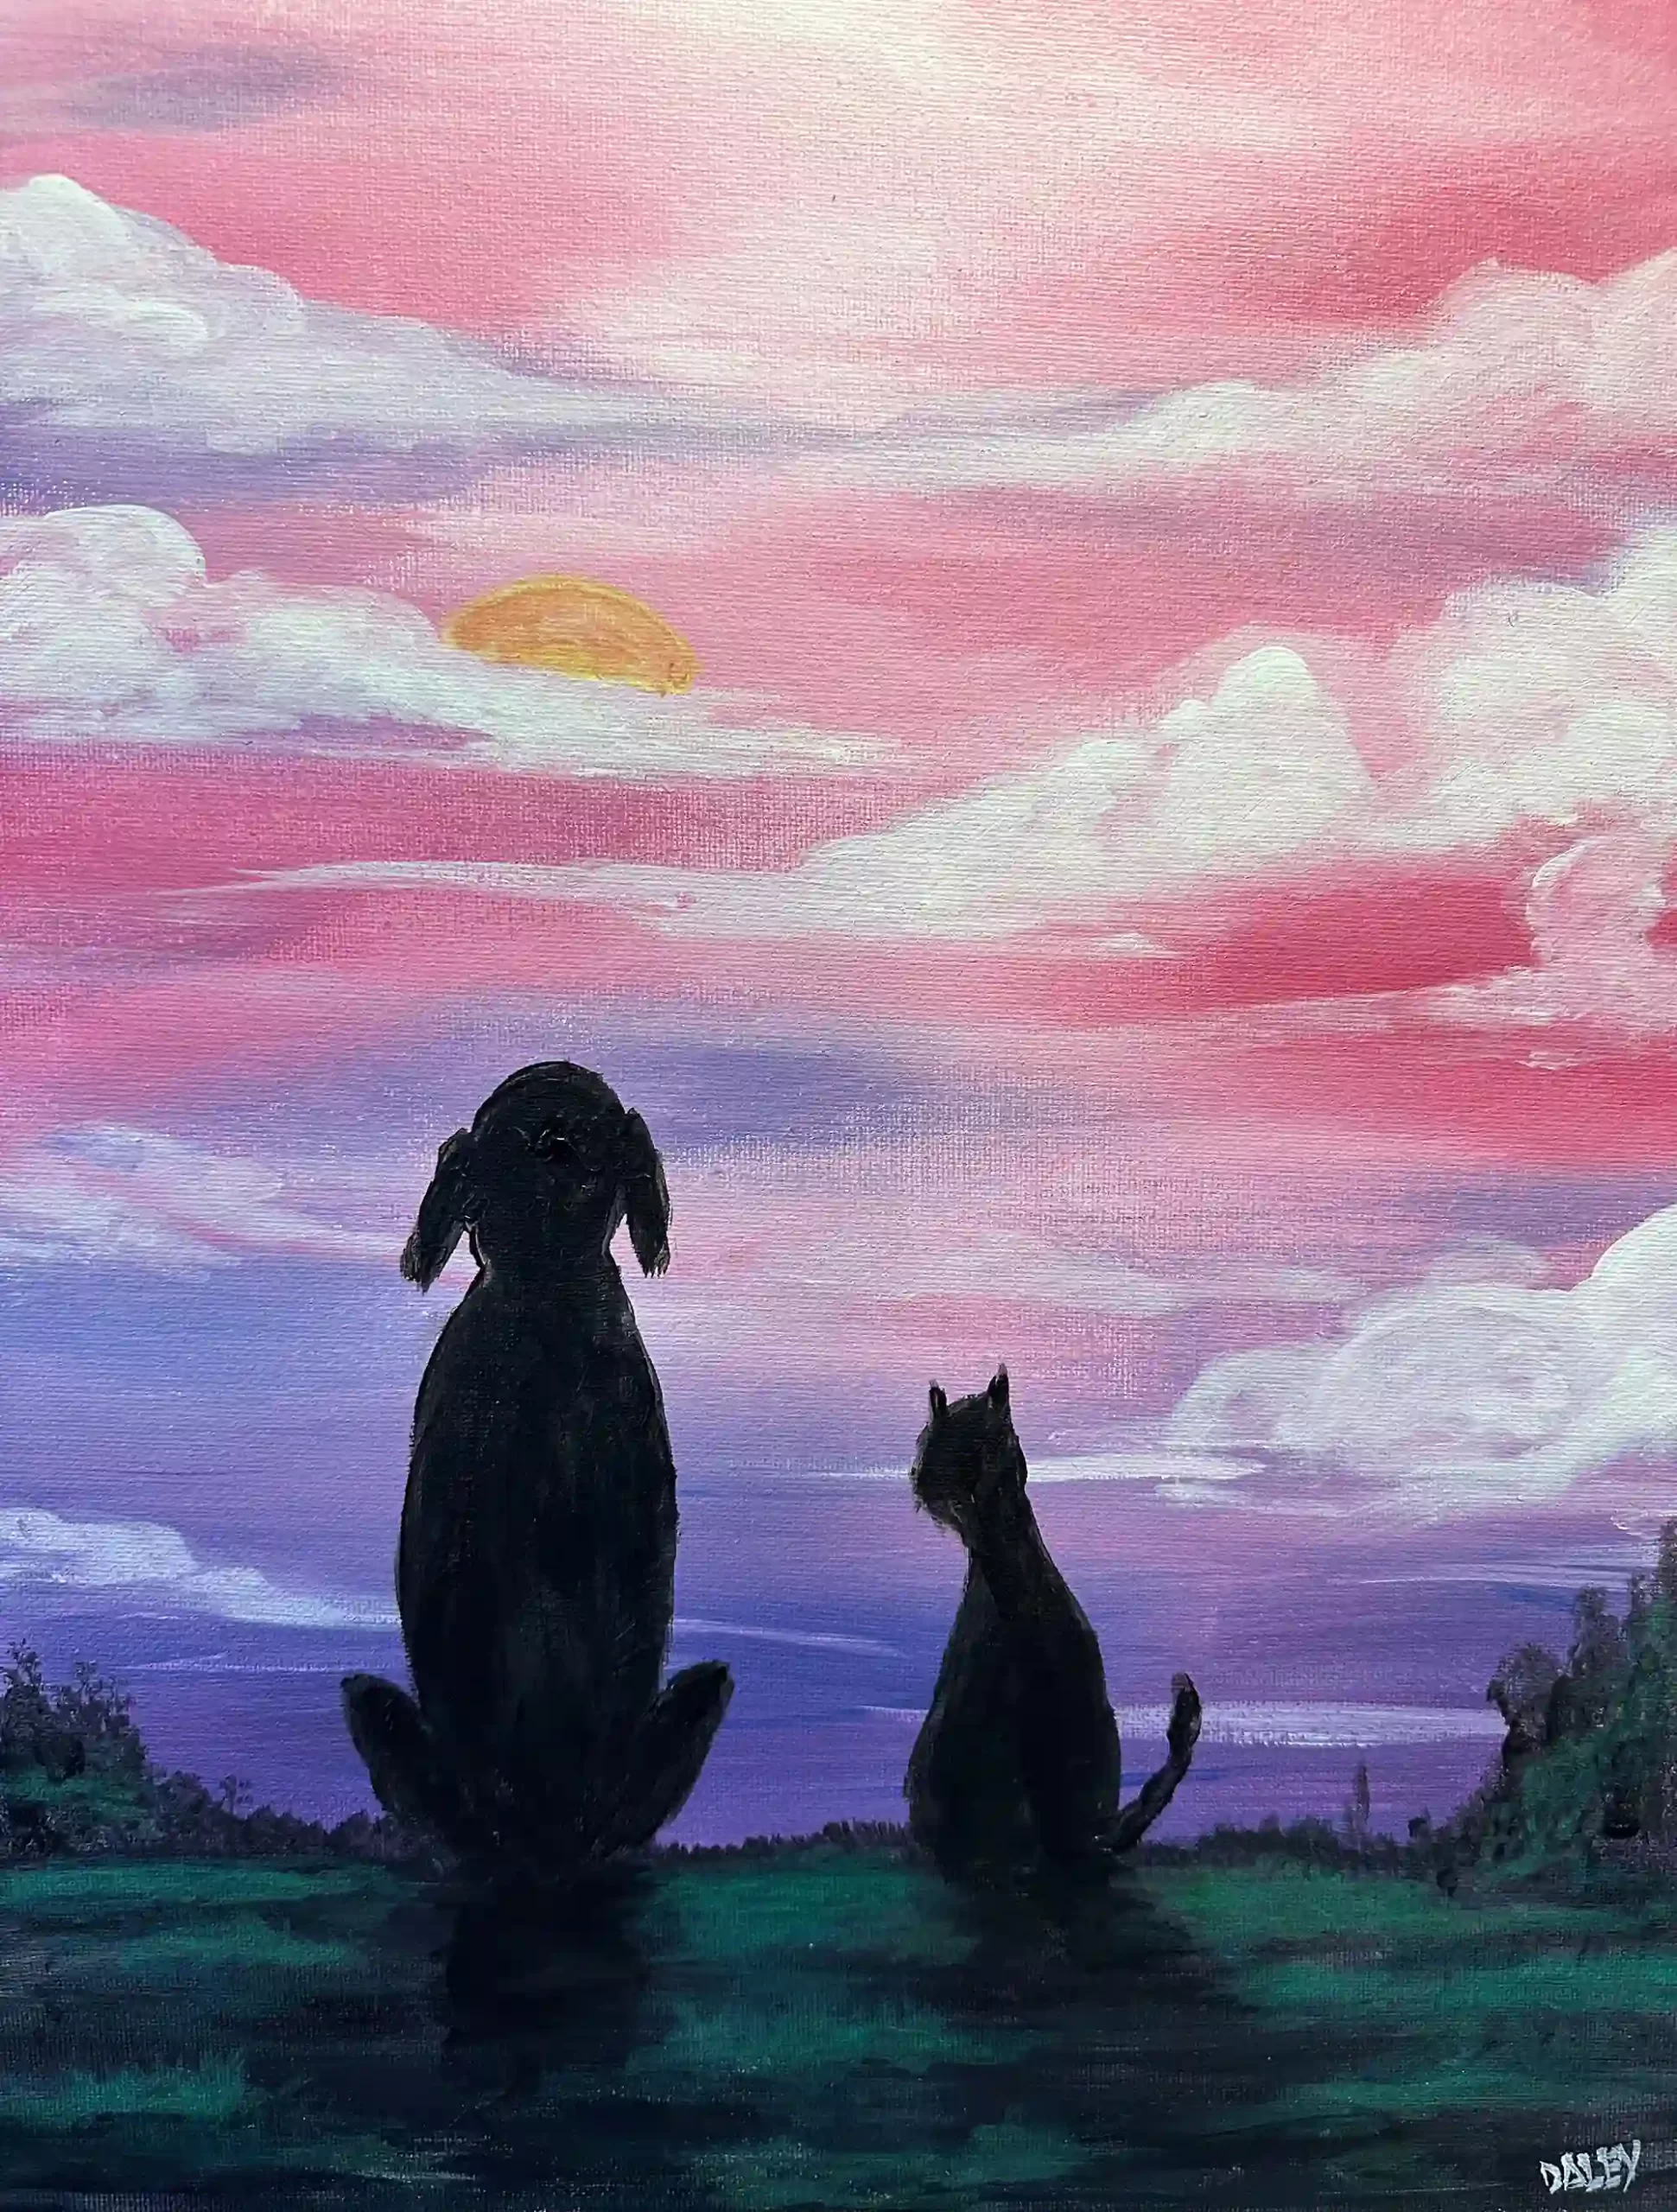 Sip & Paint for the Humane Society of Walden